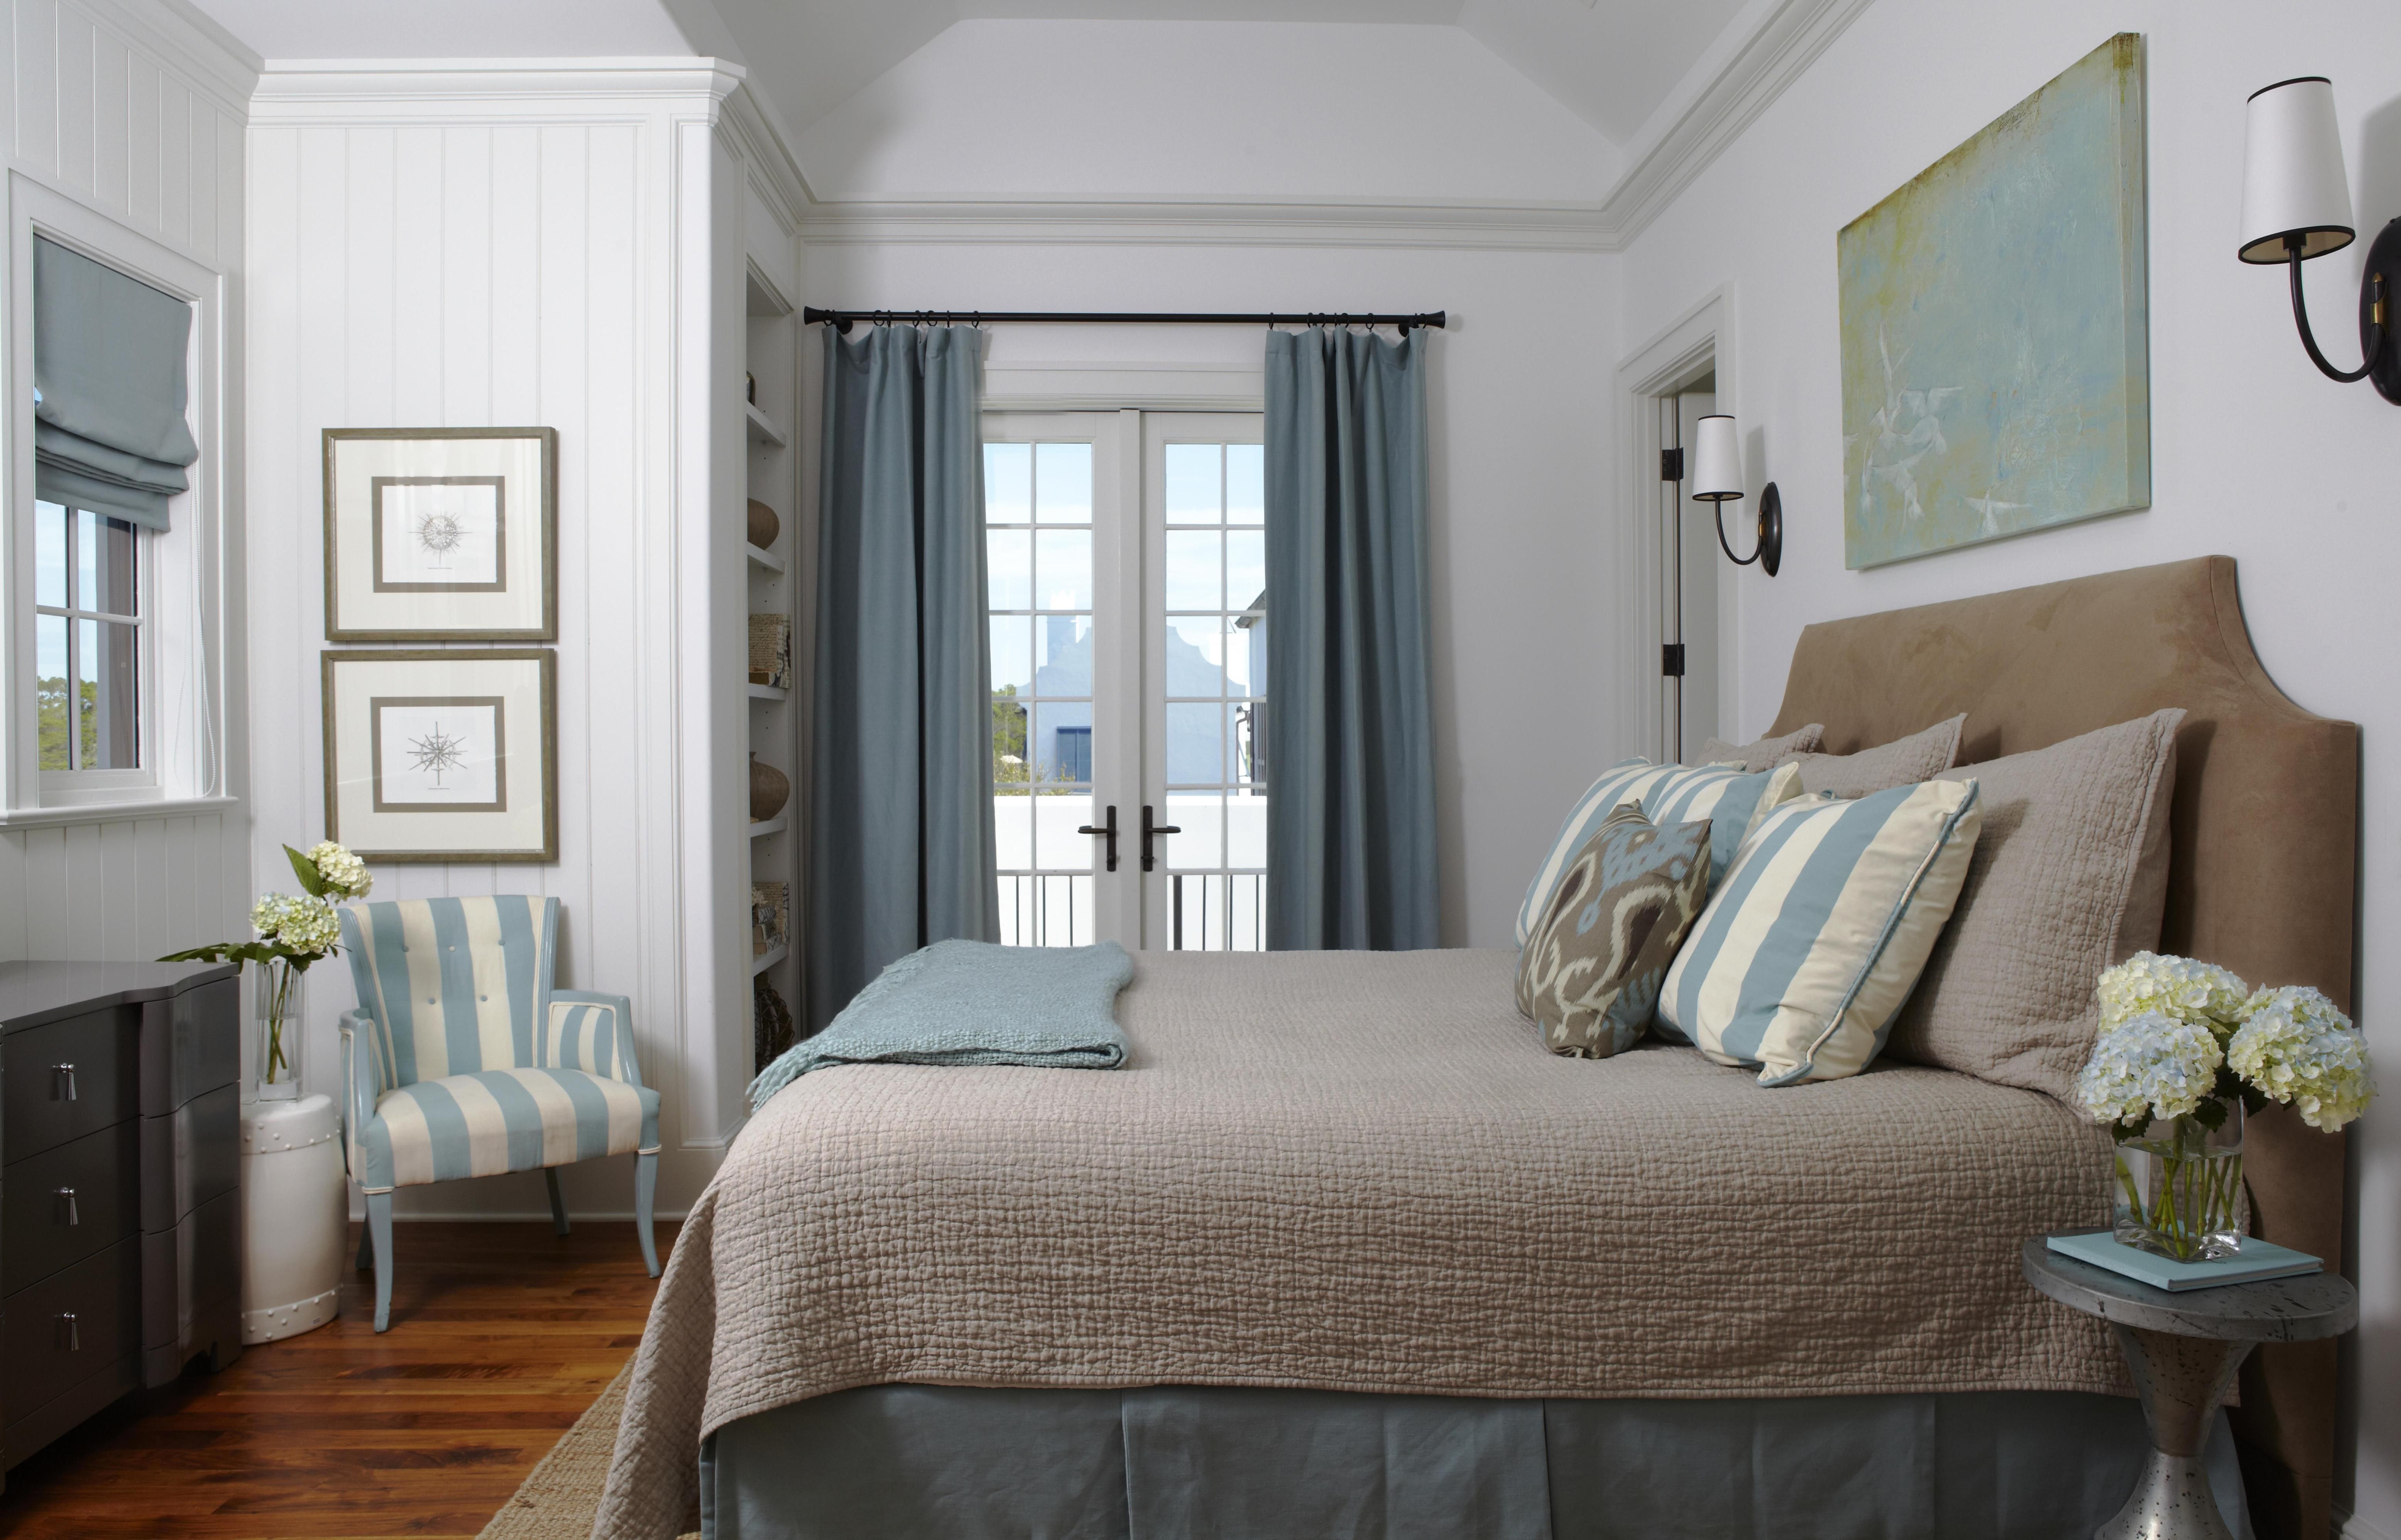 Master Bedroom In Turquoise